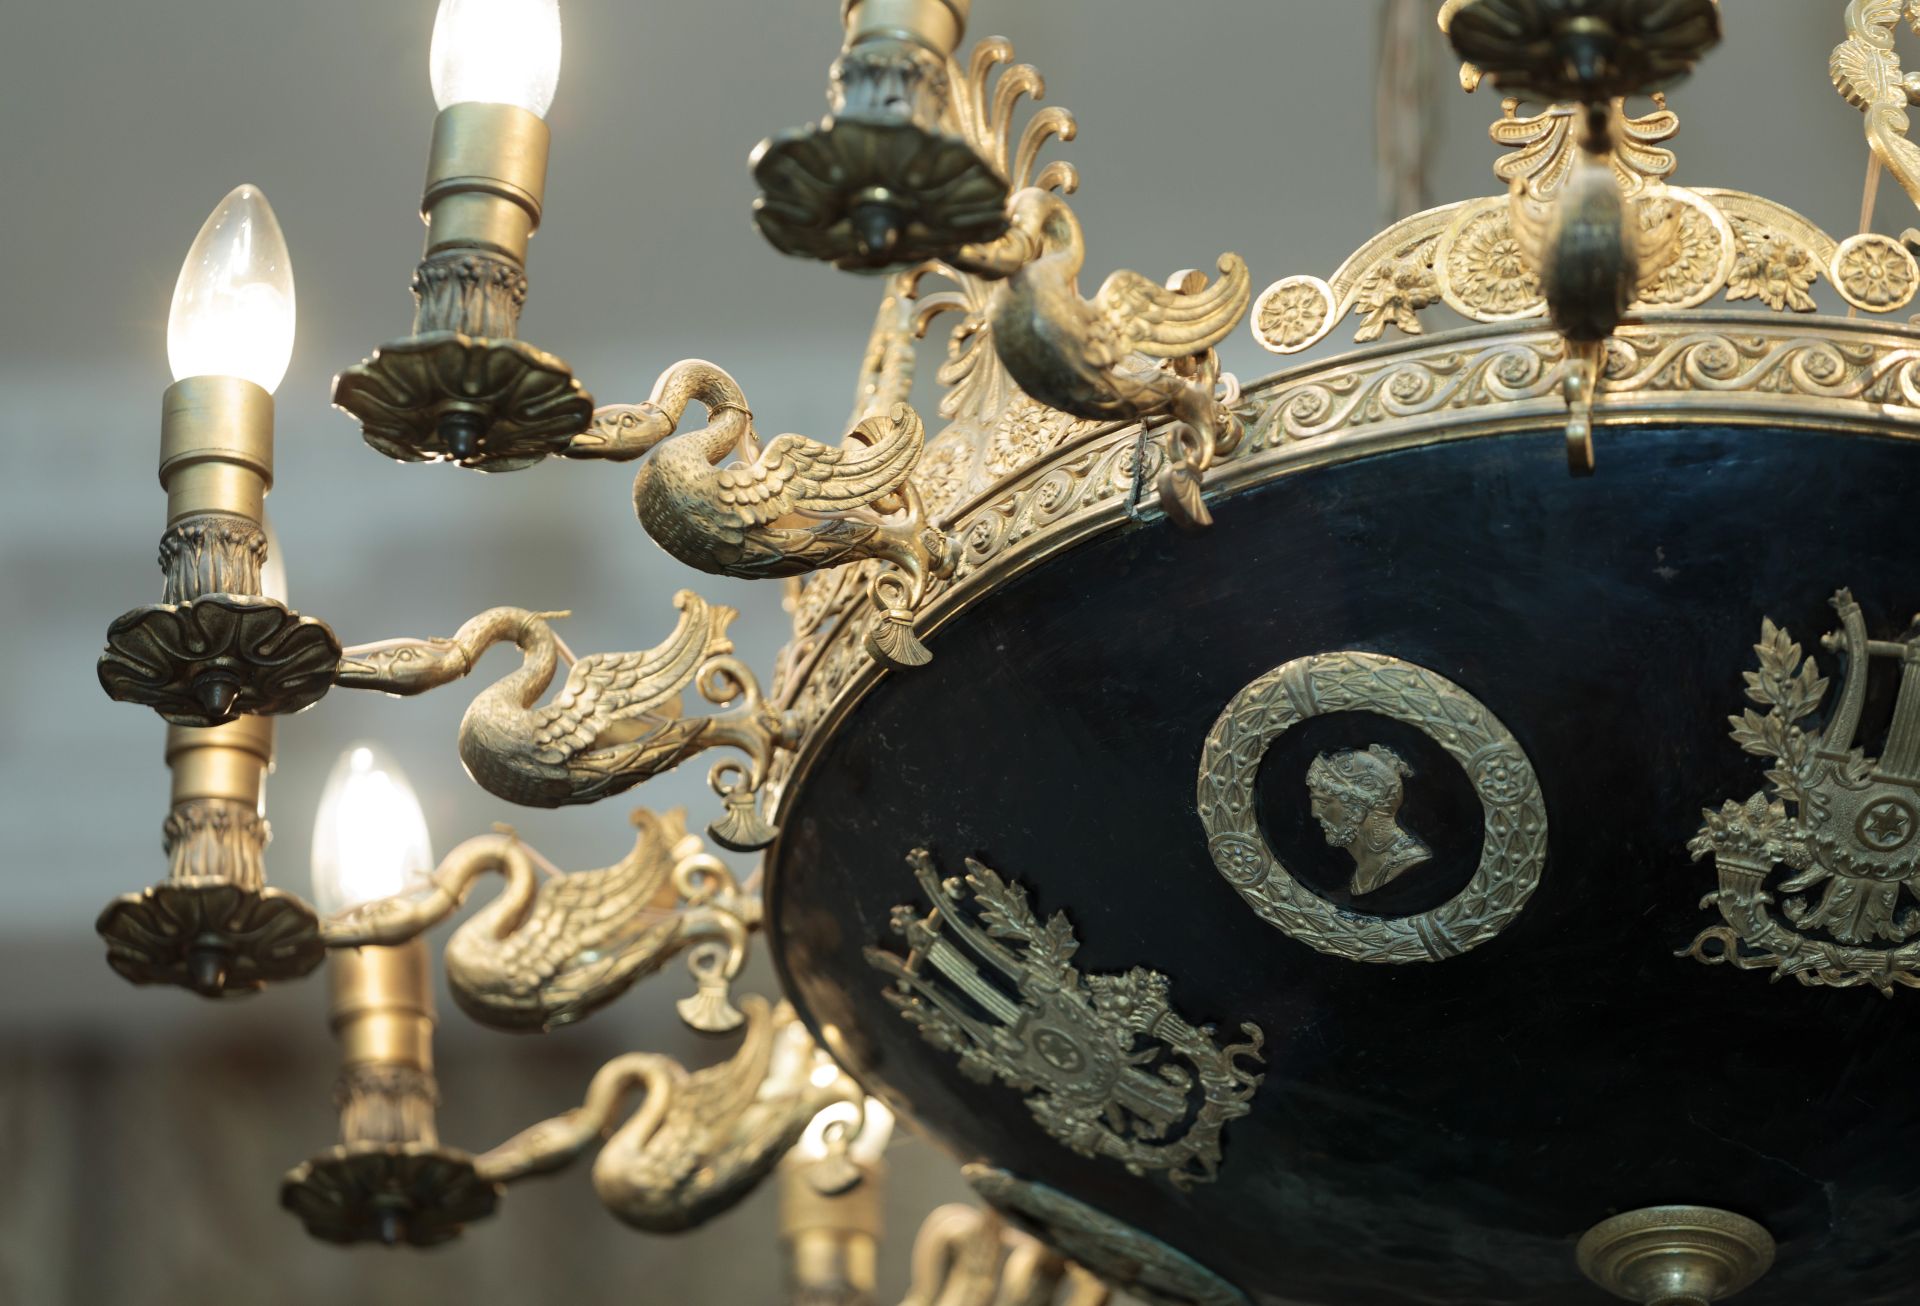 Fragment of chandelier, 1800–1829, Lithuanian National Museum of Art, TM-658. Photo by Tomas Kapočius, 2017